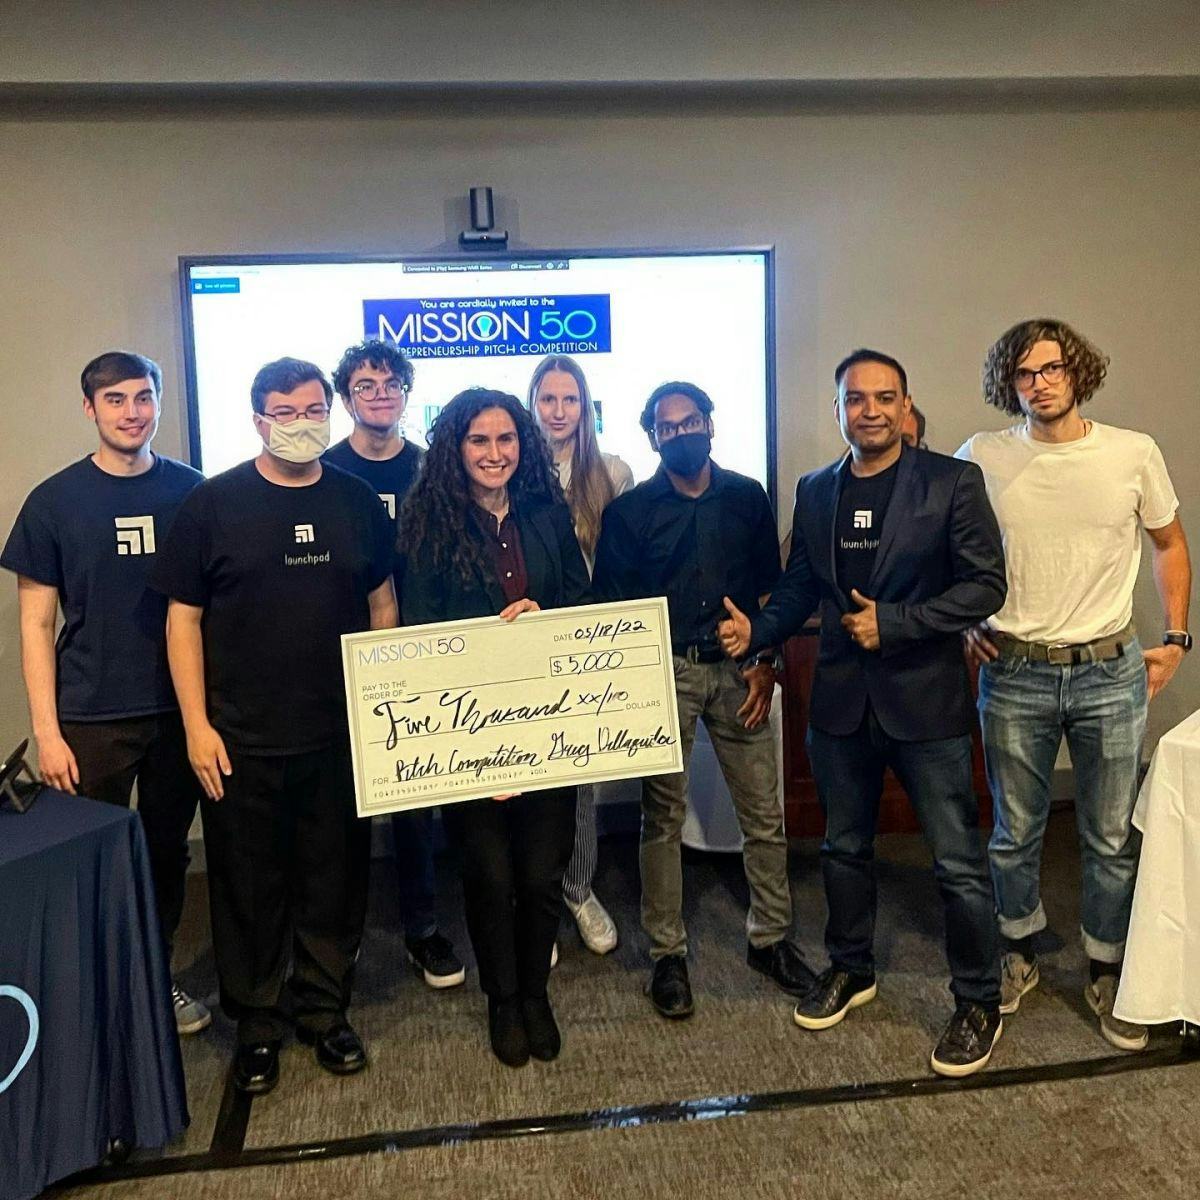 Arianna Gehan holds giant check while standing in a group in front of a sign that reads "Mission 50 Entrepreneurship Pitch Competition." The check is written from Mission 50 for $5000.